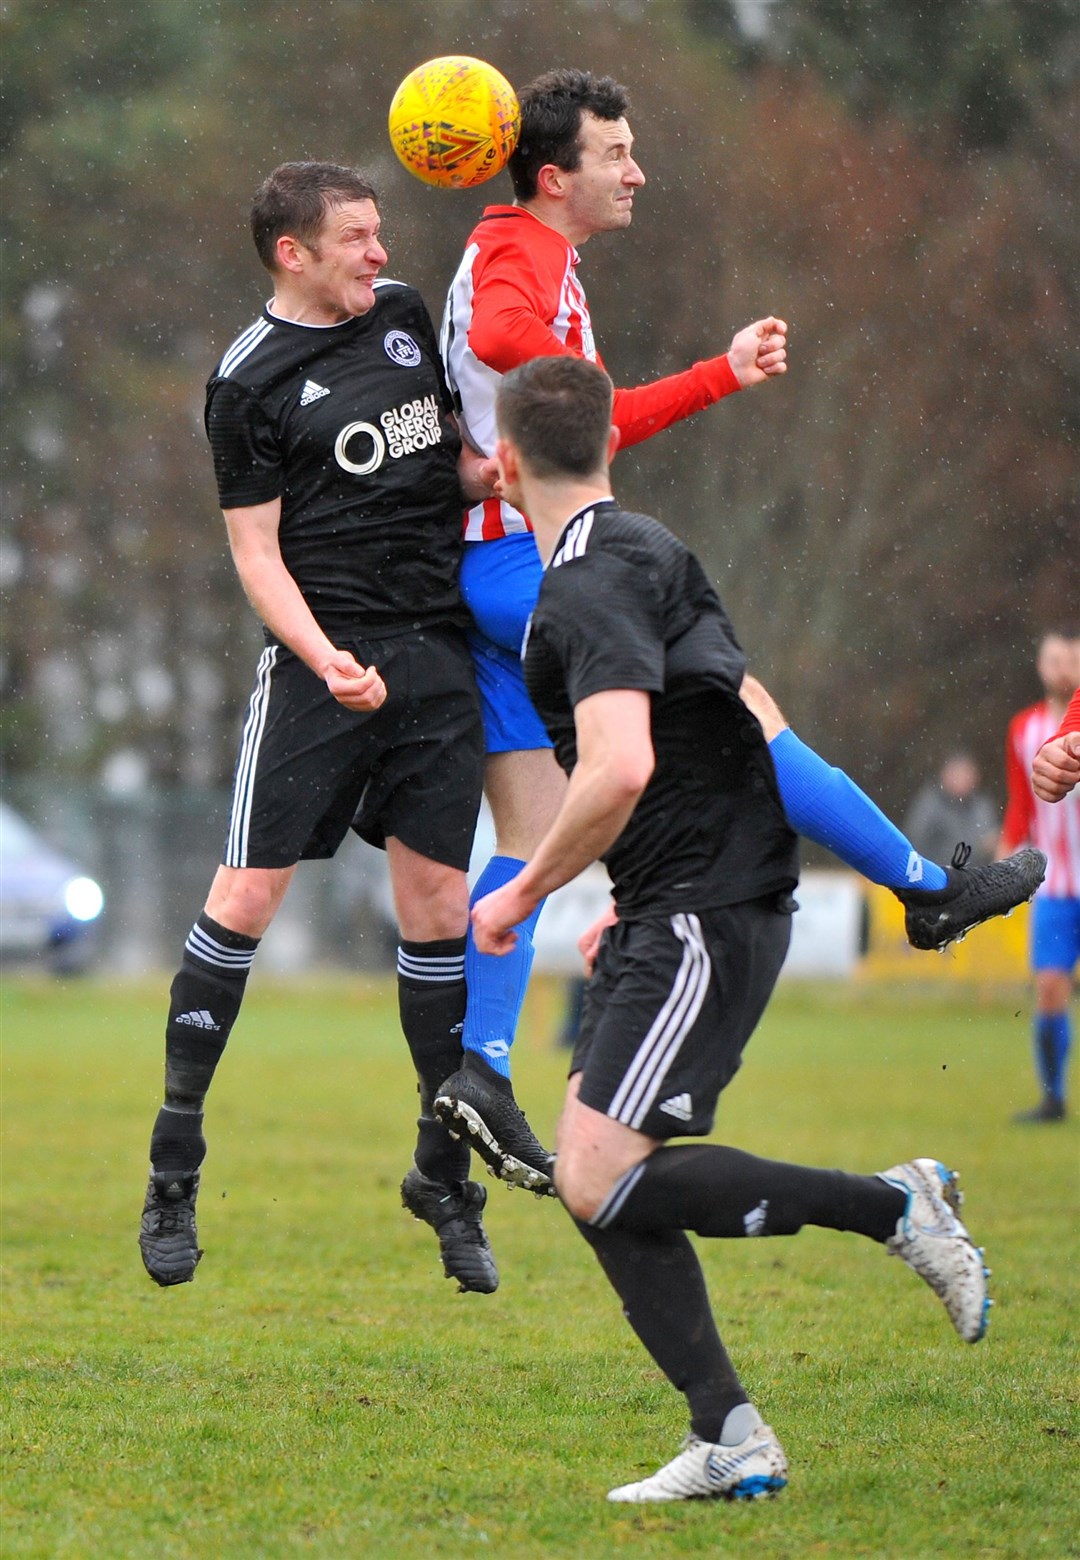 St Duthus and Invergordon went head to head in the Jock MacKay Cup semi final. Picture: Graeme Webster